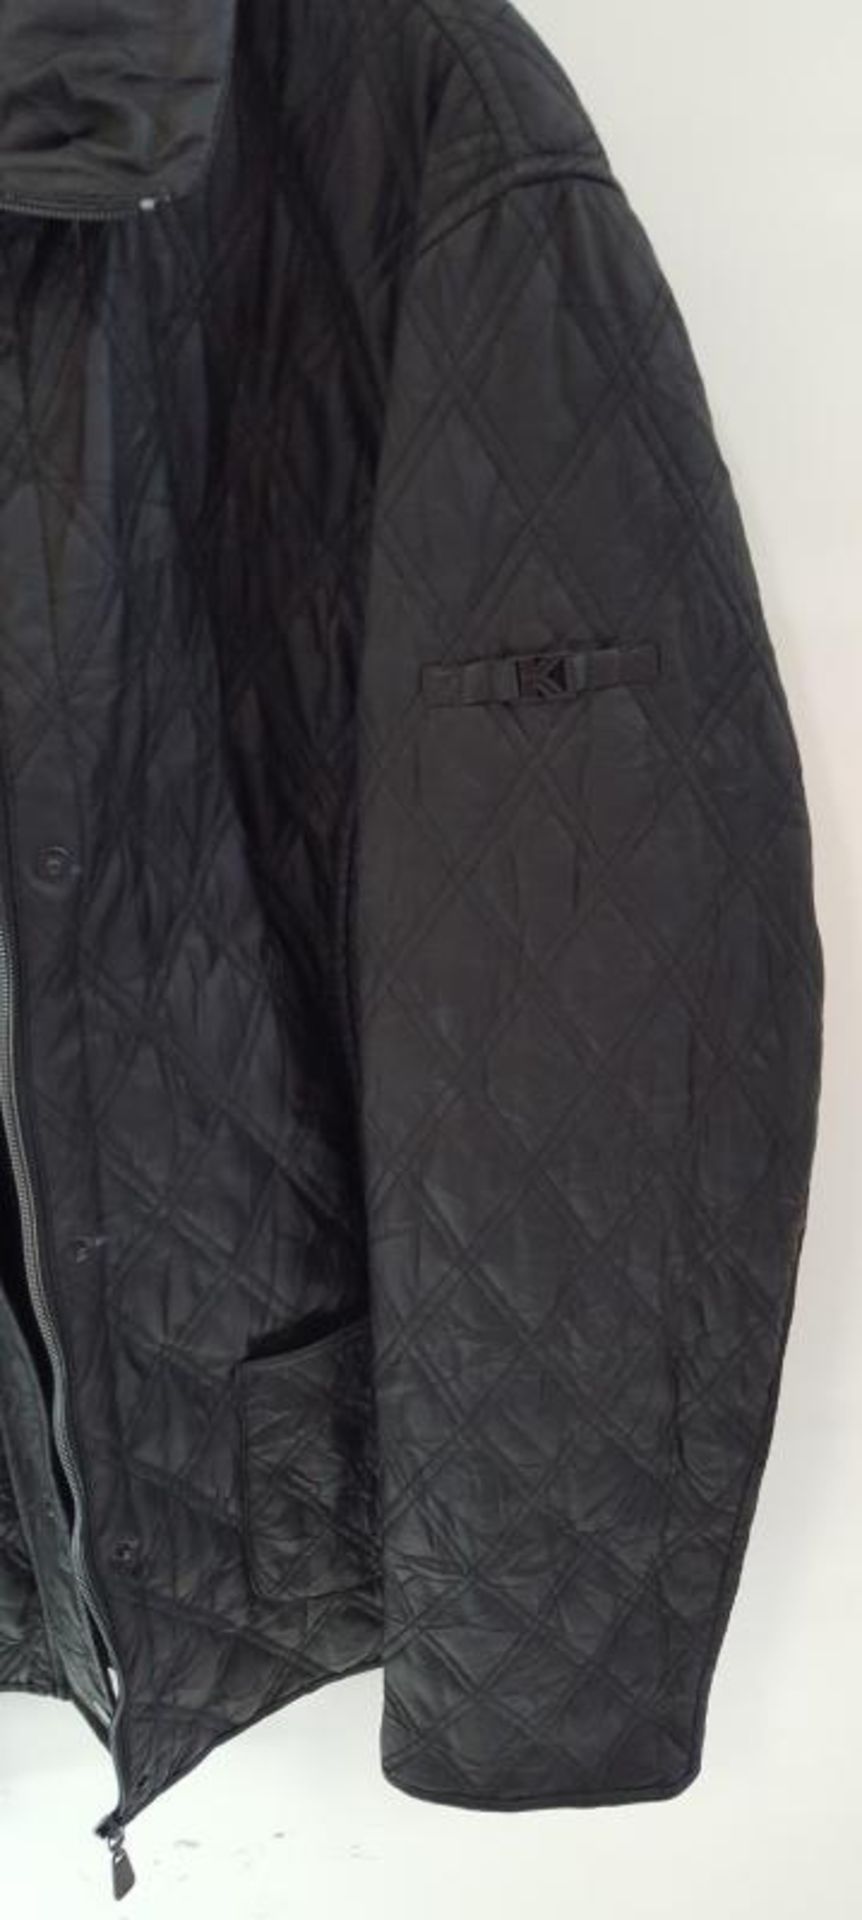 1 x STEILMANN KSTN Ladies Zipped Faux Leather Quilted Pattern Jacket - Colour: Black - UK Size 12 - - Image 4 of 5